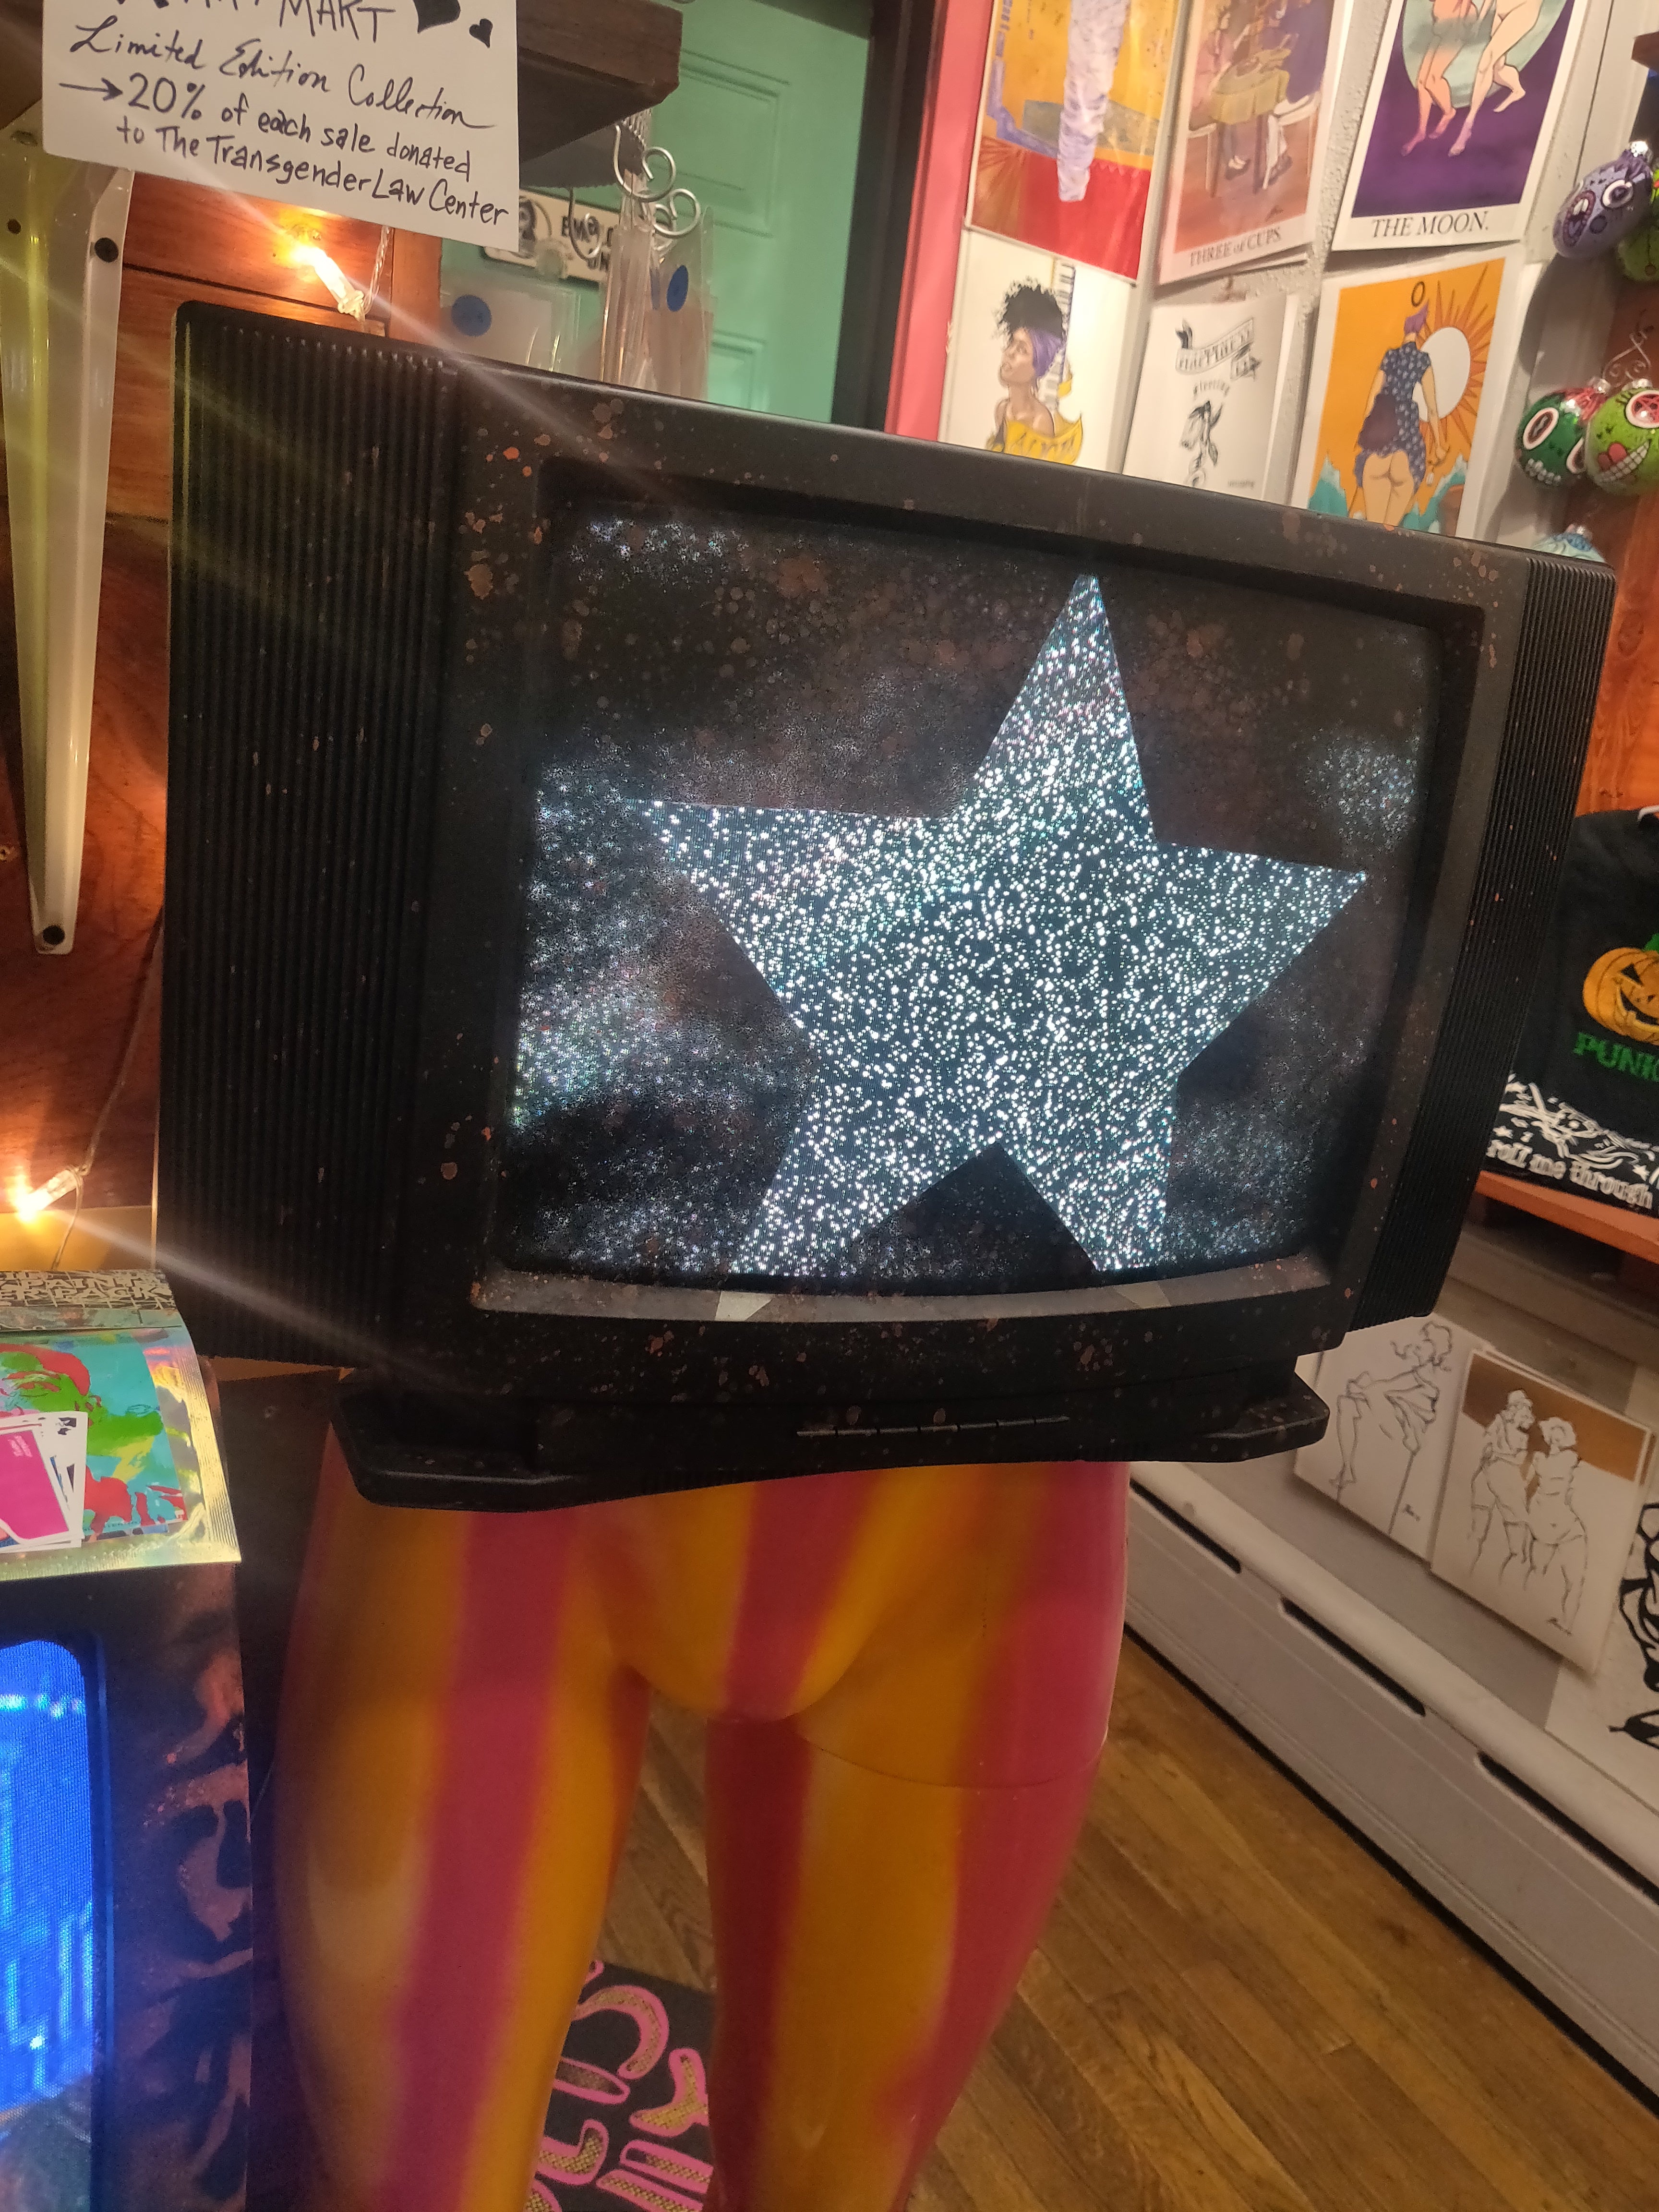 Black Star Television (Works!) On Mannequin Legs @tapedofftv Spray-Painted TV